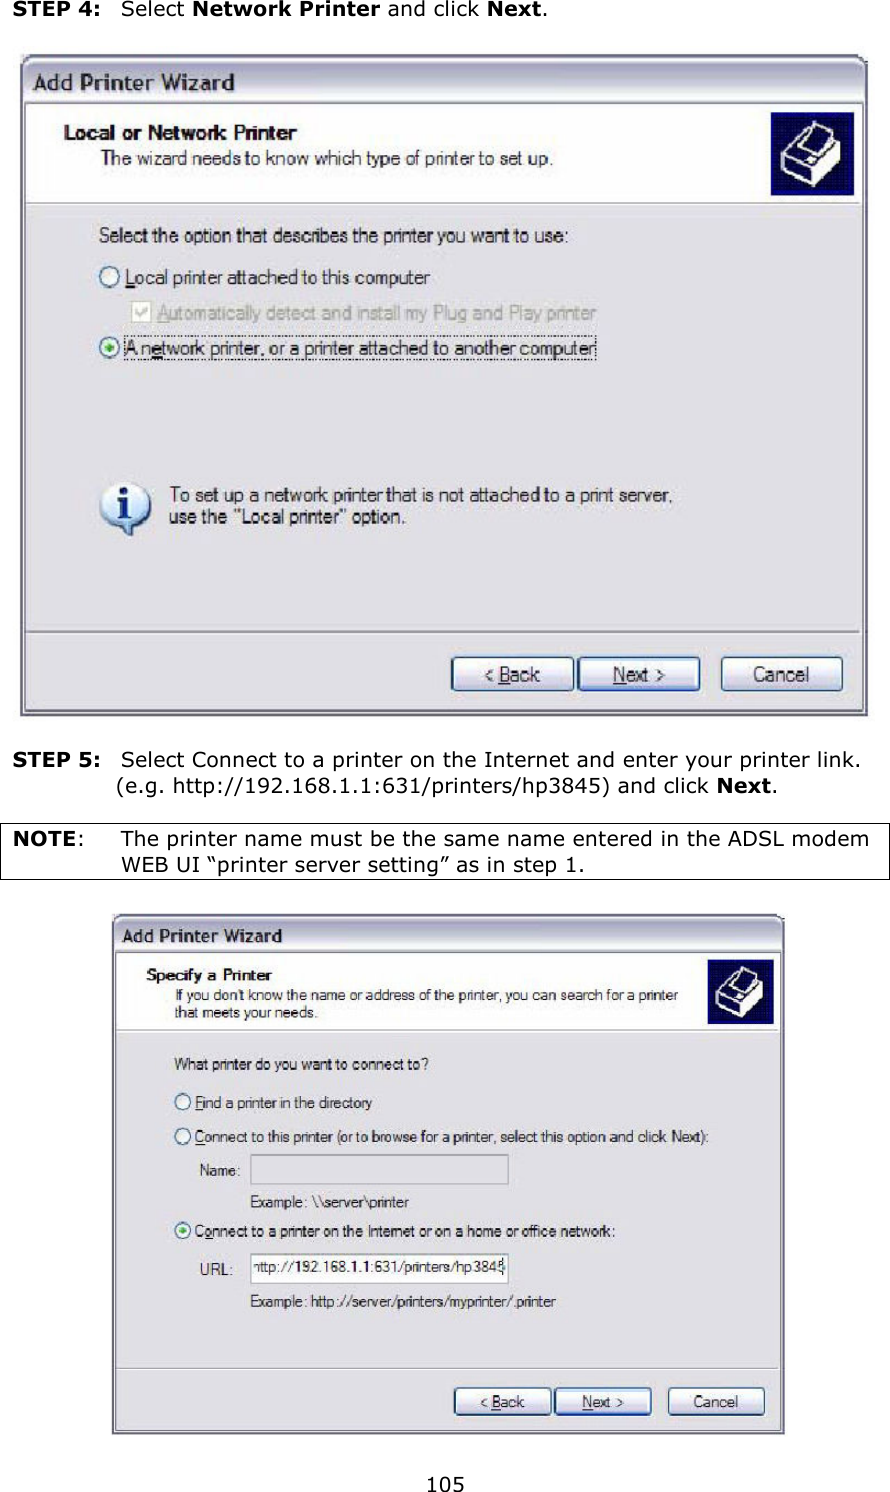   105 STEP 4:  Select Network Printer and click Next.    STEP 5:   Select Connect to a printer on the Internet and enter your printer link.   (e.g. http://192.168.1.1:631/printers/hp3845) and click Next.      NOTE:    The printer name must be the same name entered in the ADSL modem WEB UI “printer server setting” as in step 1.   